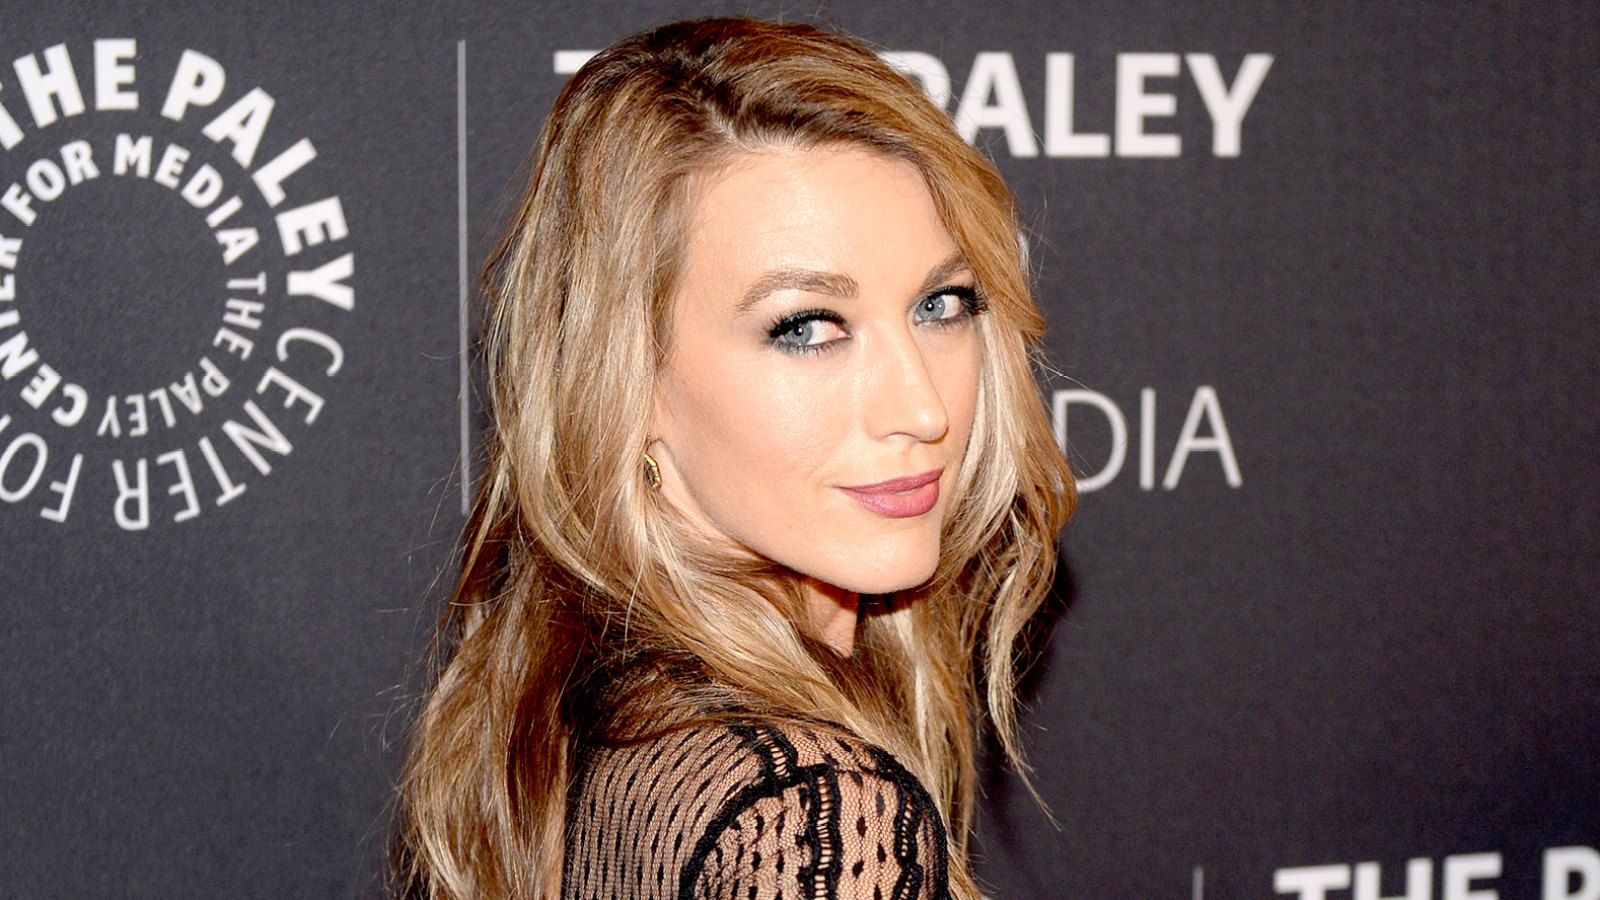 Natalie Zea attends "The Detour" season 2 screening at The Paley Center for Media on February 21, 2017 in New York City.